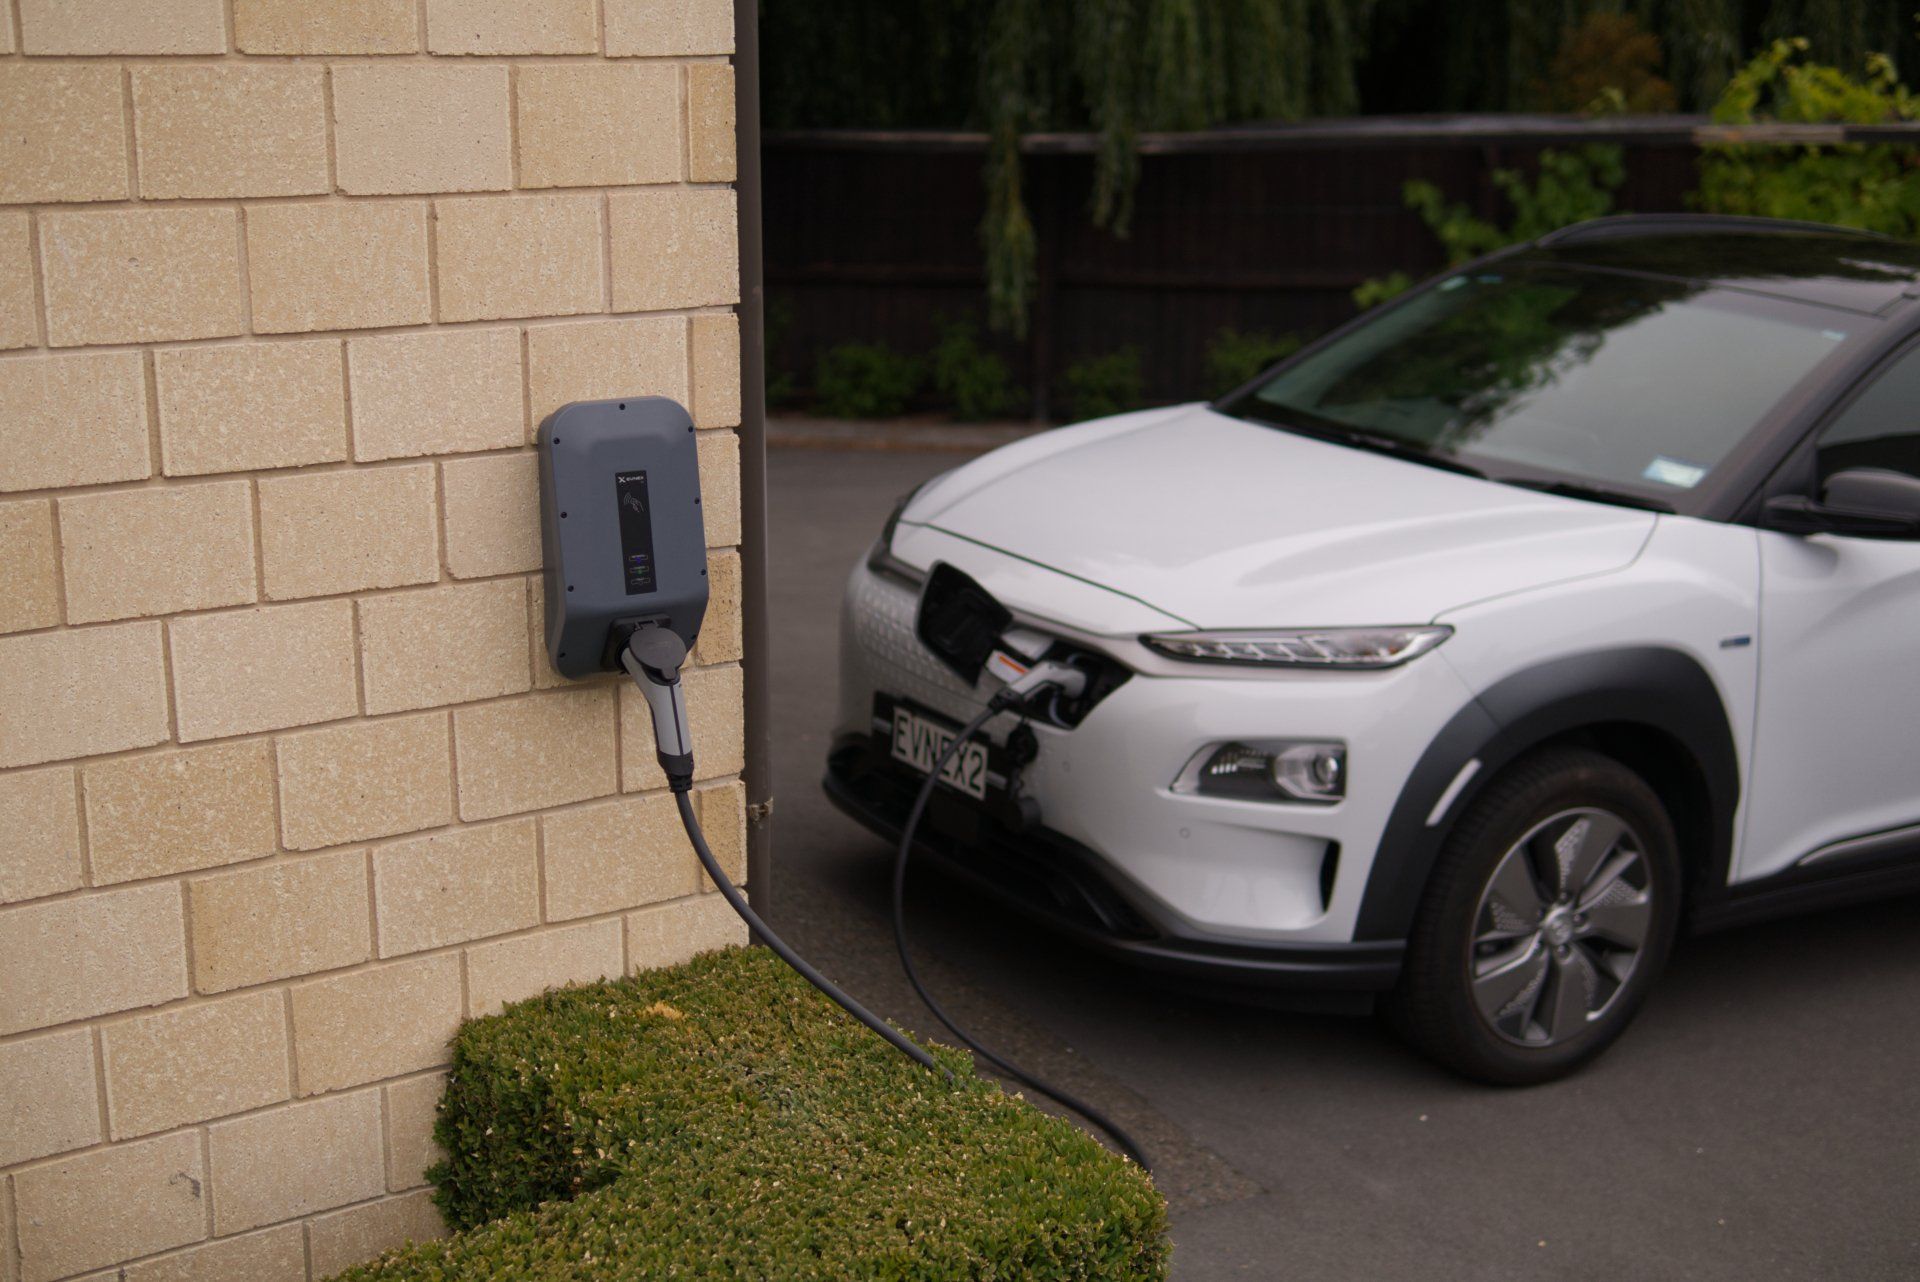 Top Rated Electric Vehicle Charging Stations Company in Maui, Hawaii